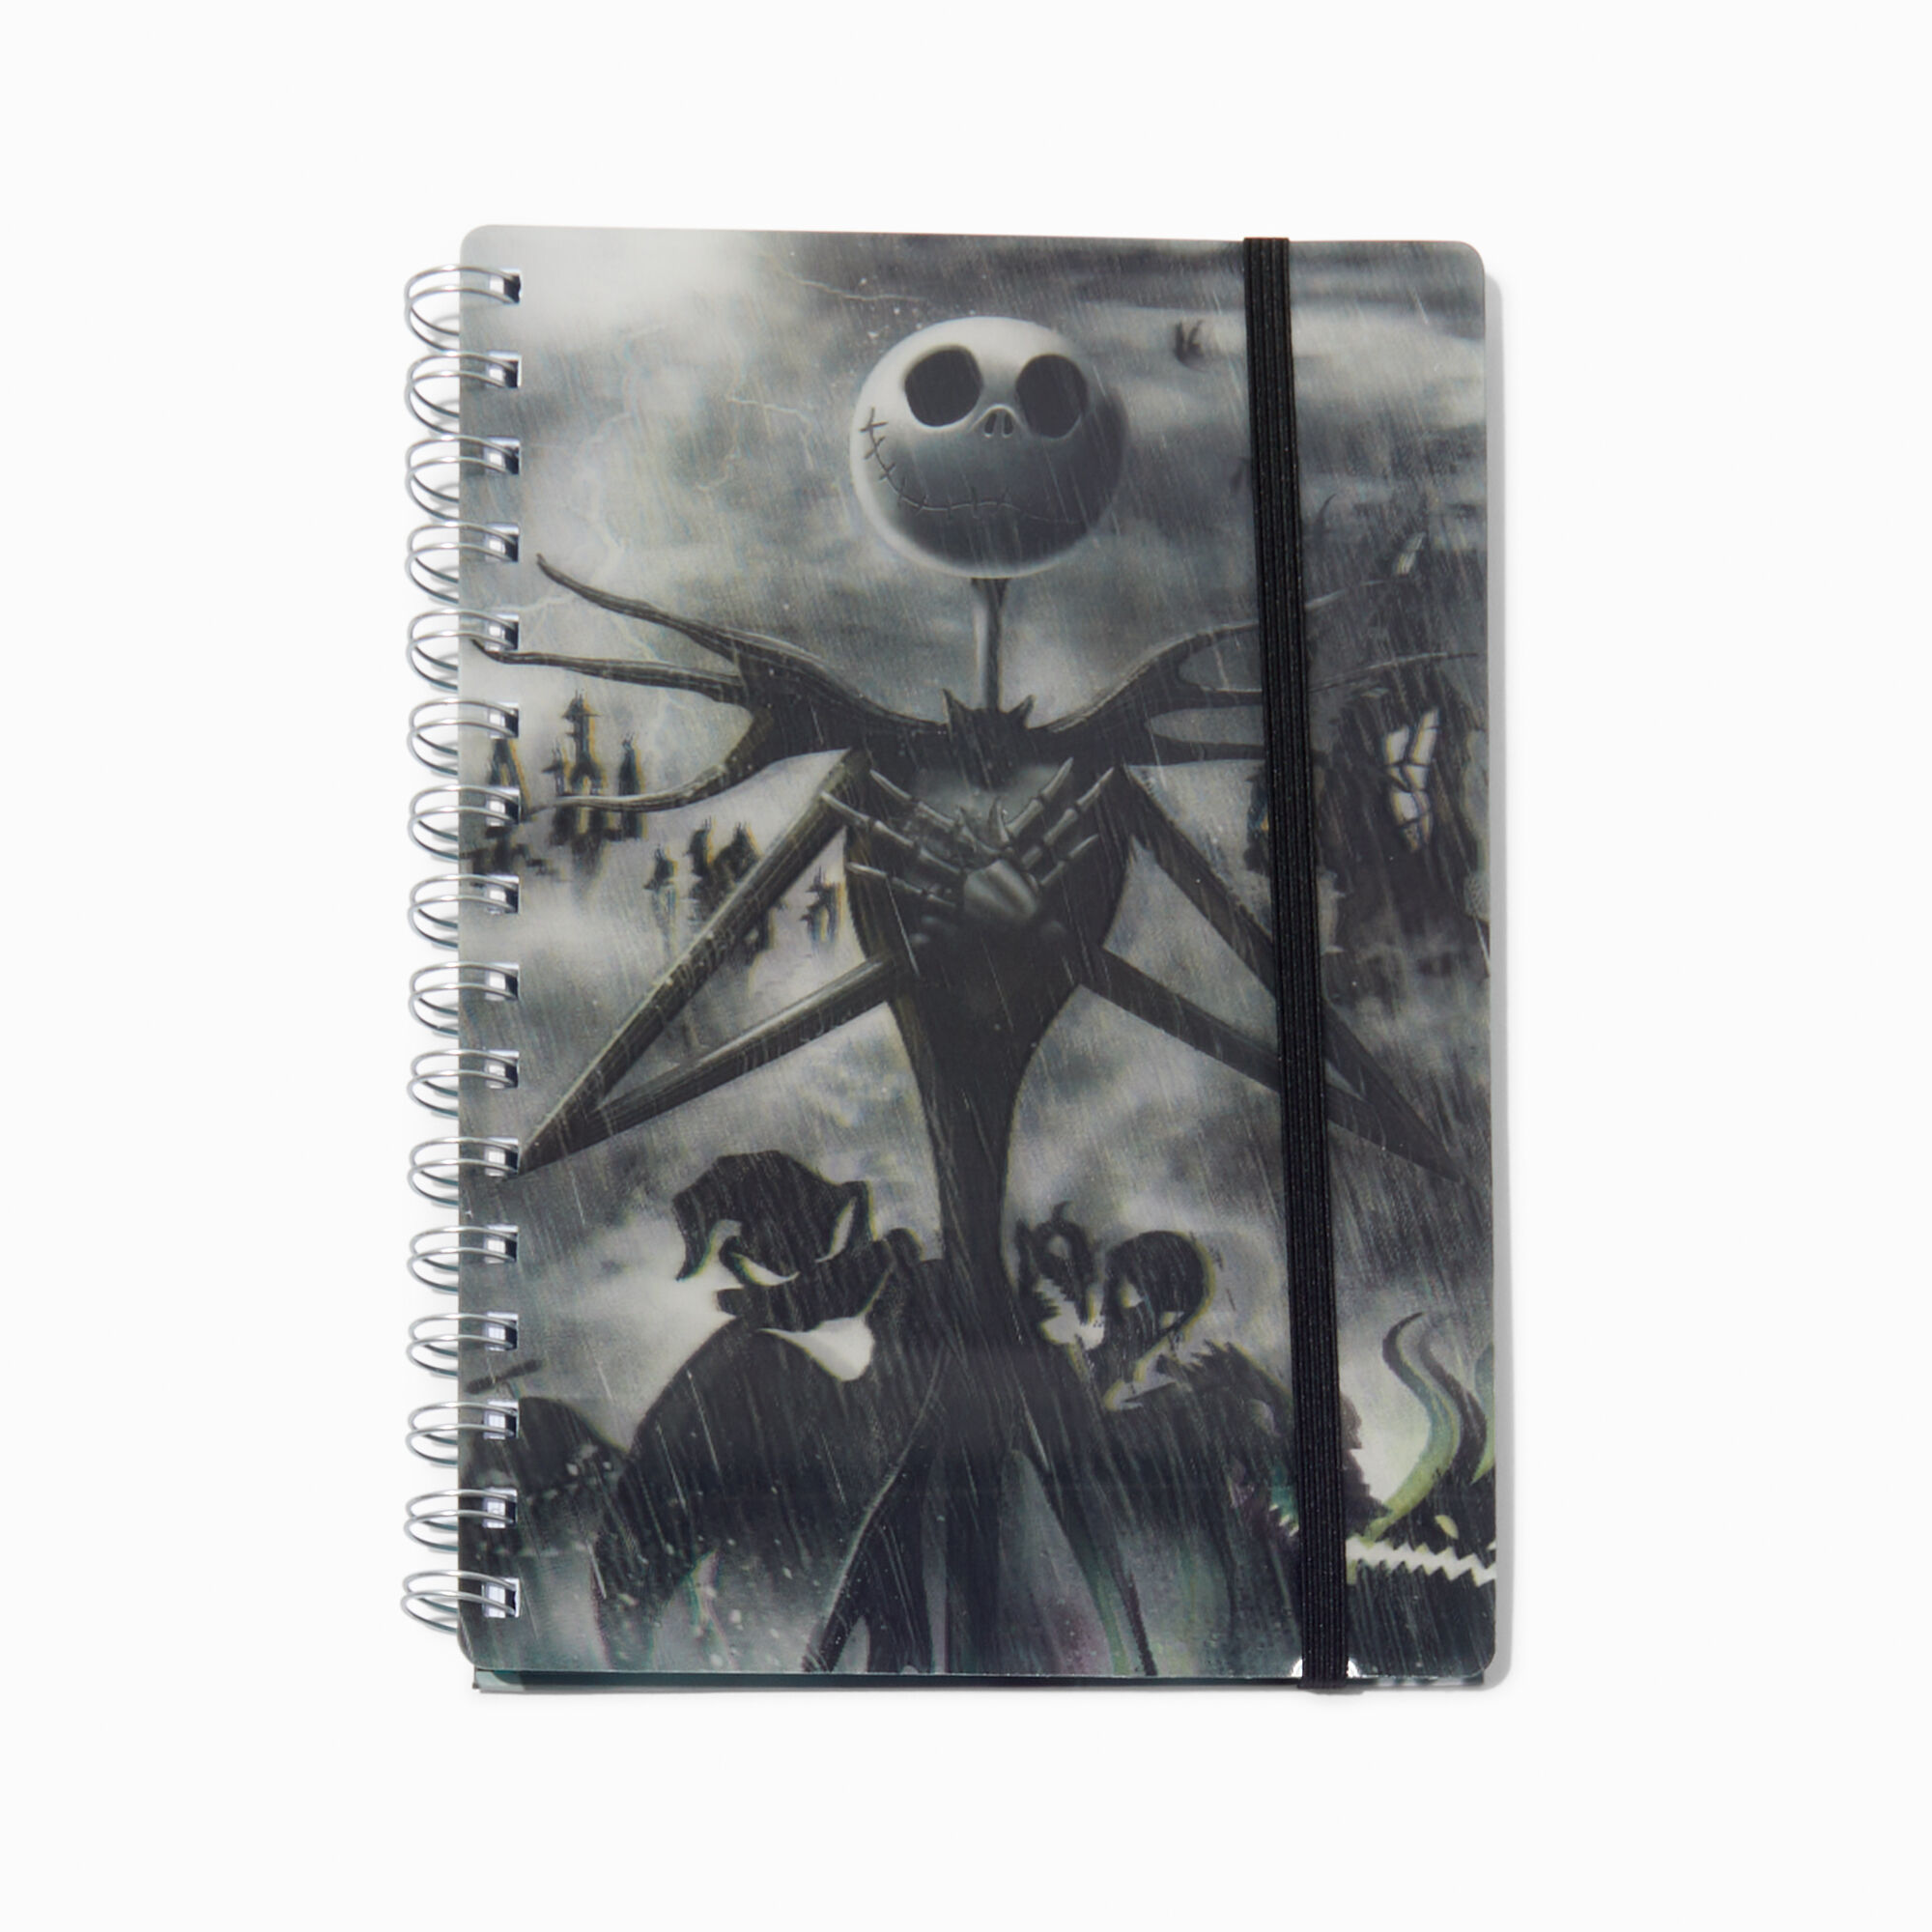 View Claires The Nightmare Before Christmas Notebook information